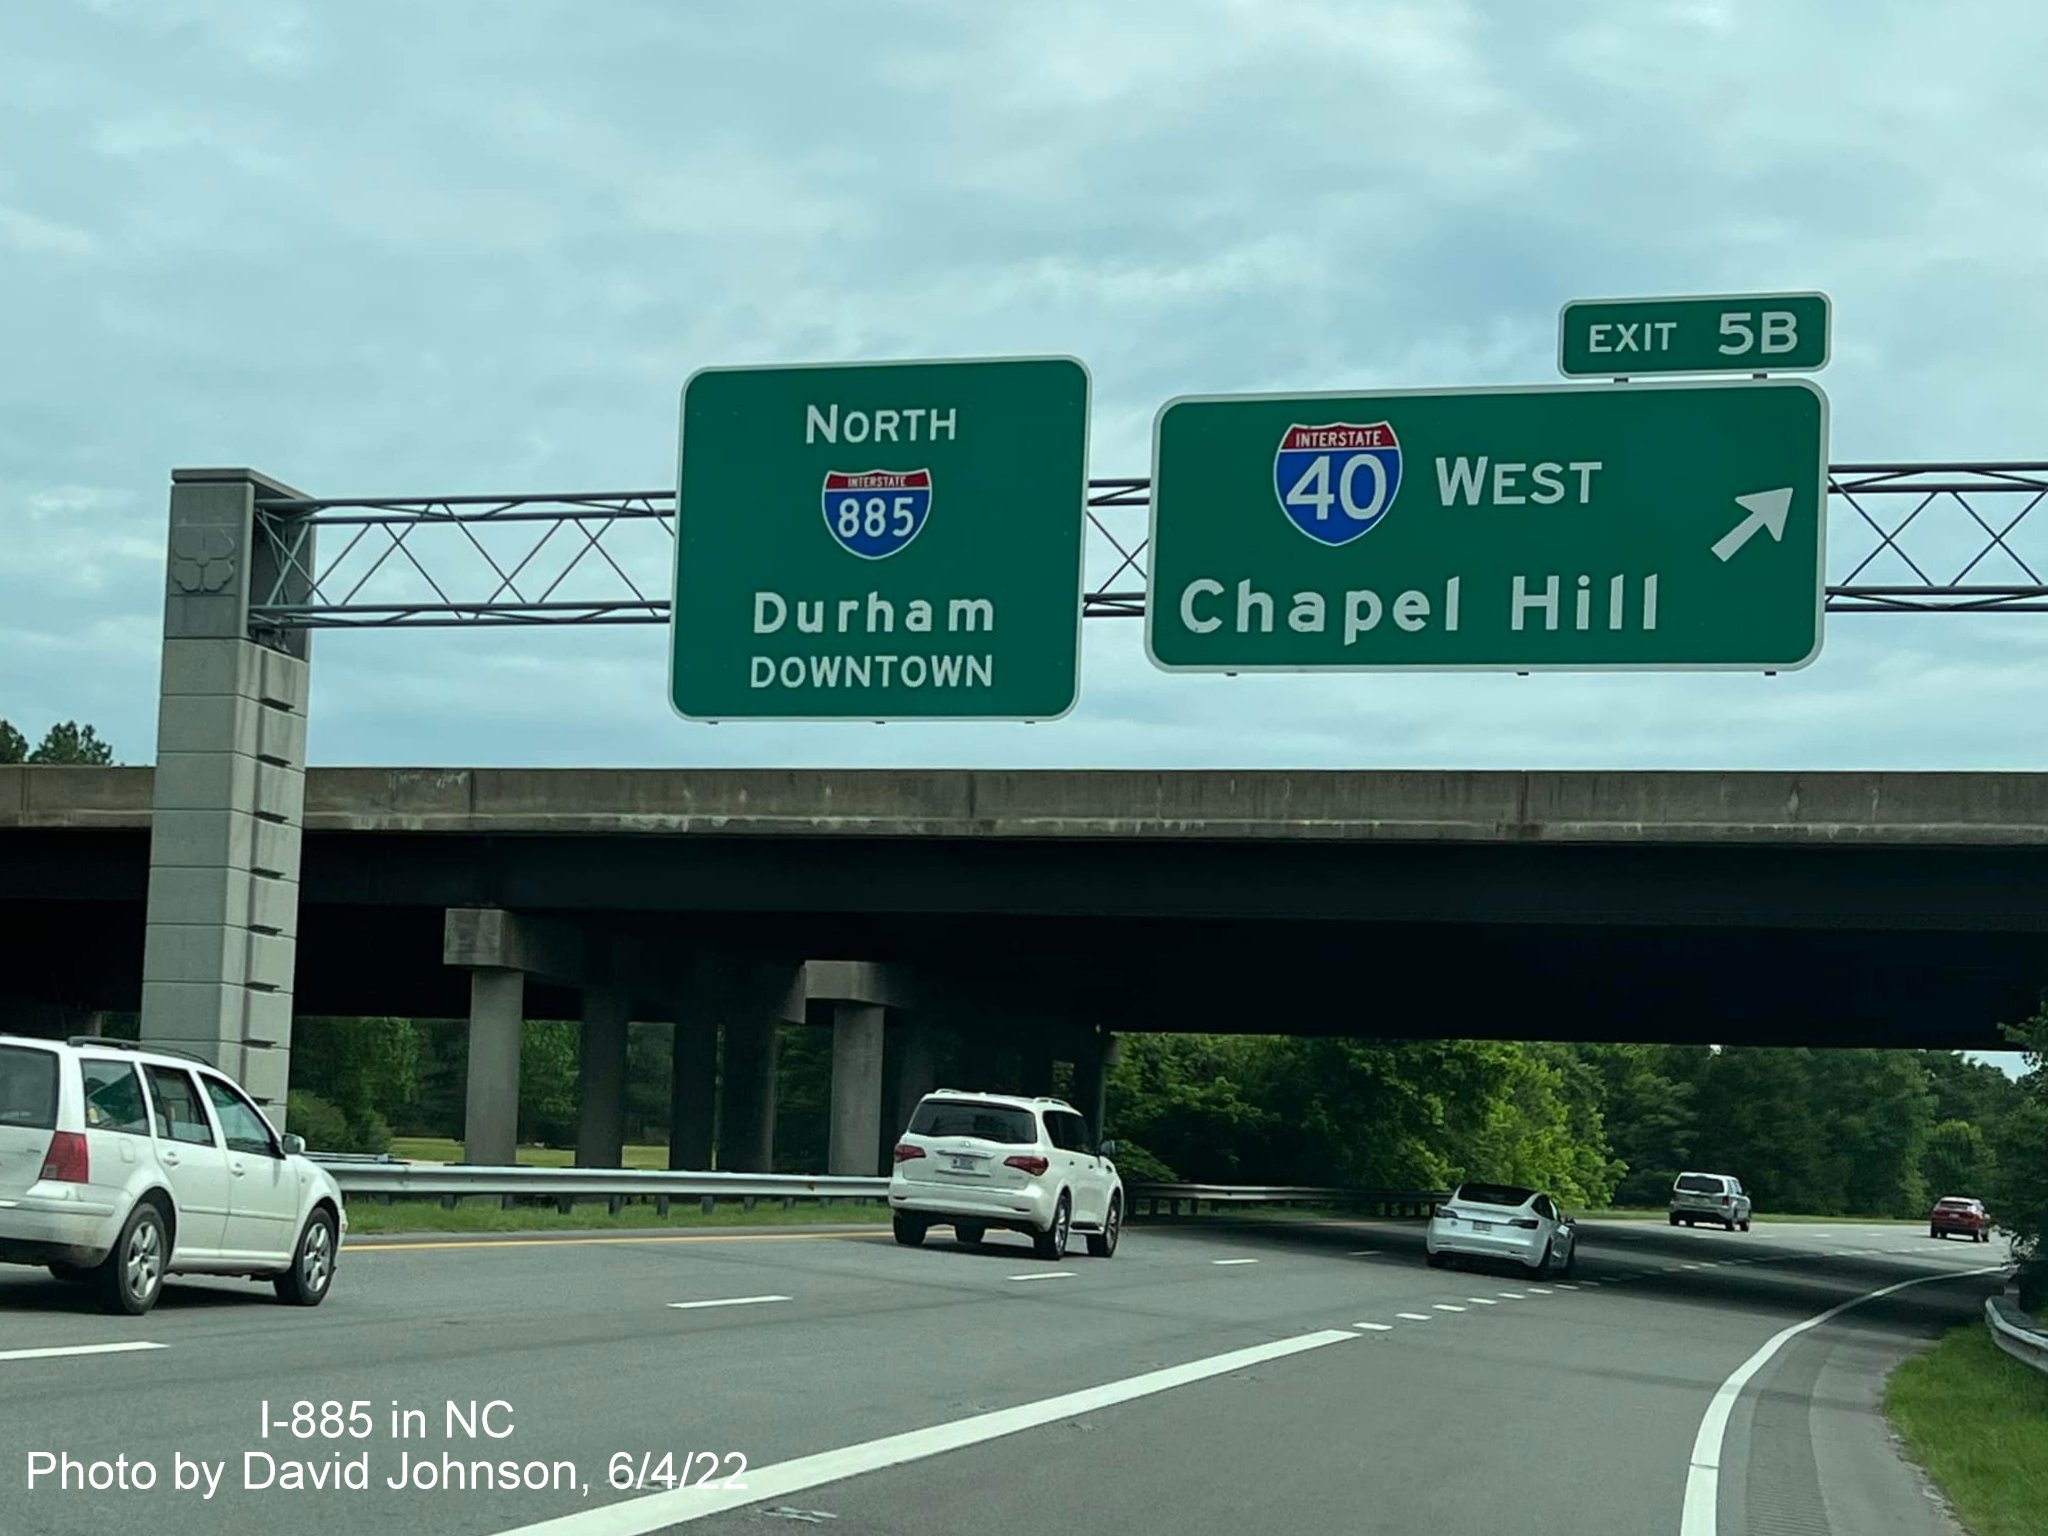 Image of new pull thru sign with I-885 shield at start of the Durham Freeway, by David Johnson, June 2022